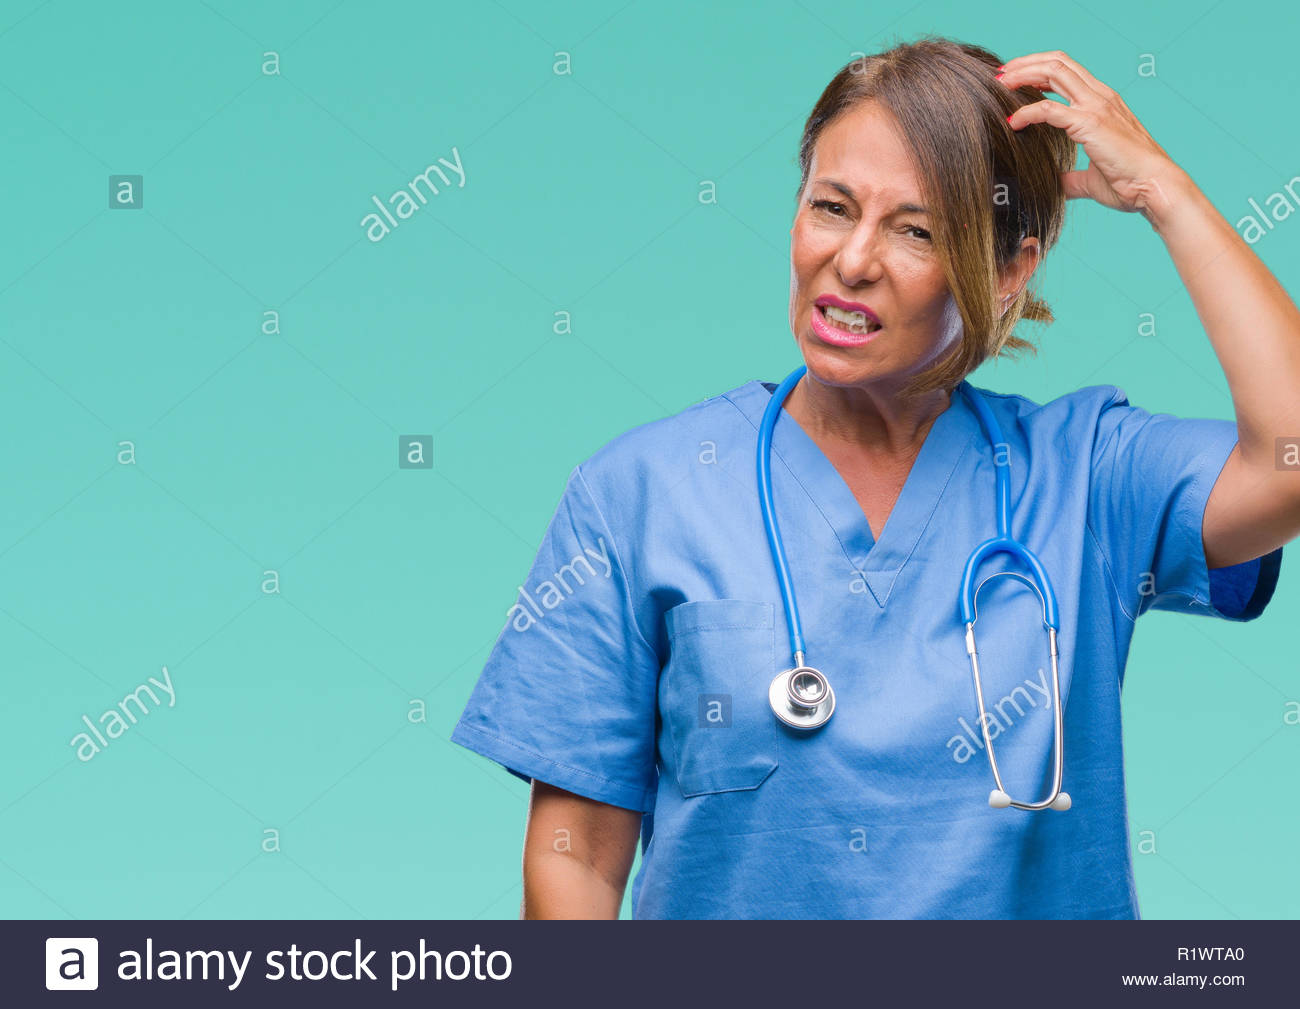 Middle Age Senior Nurse Doctor Woman Over Isolated Background